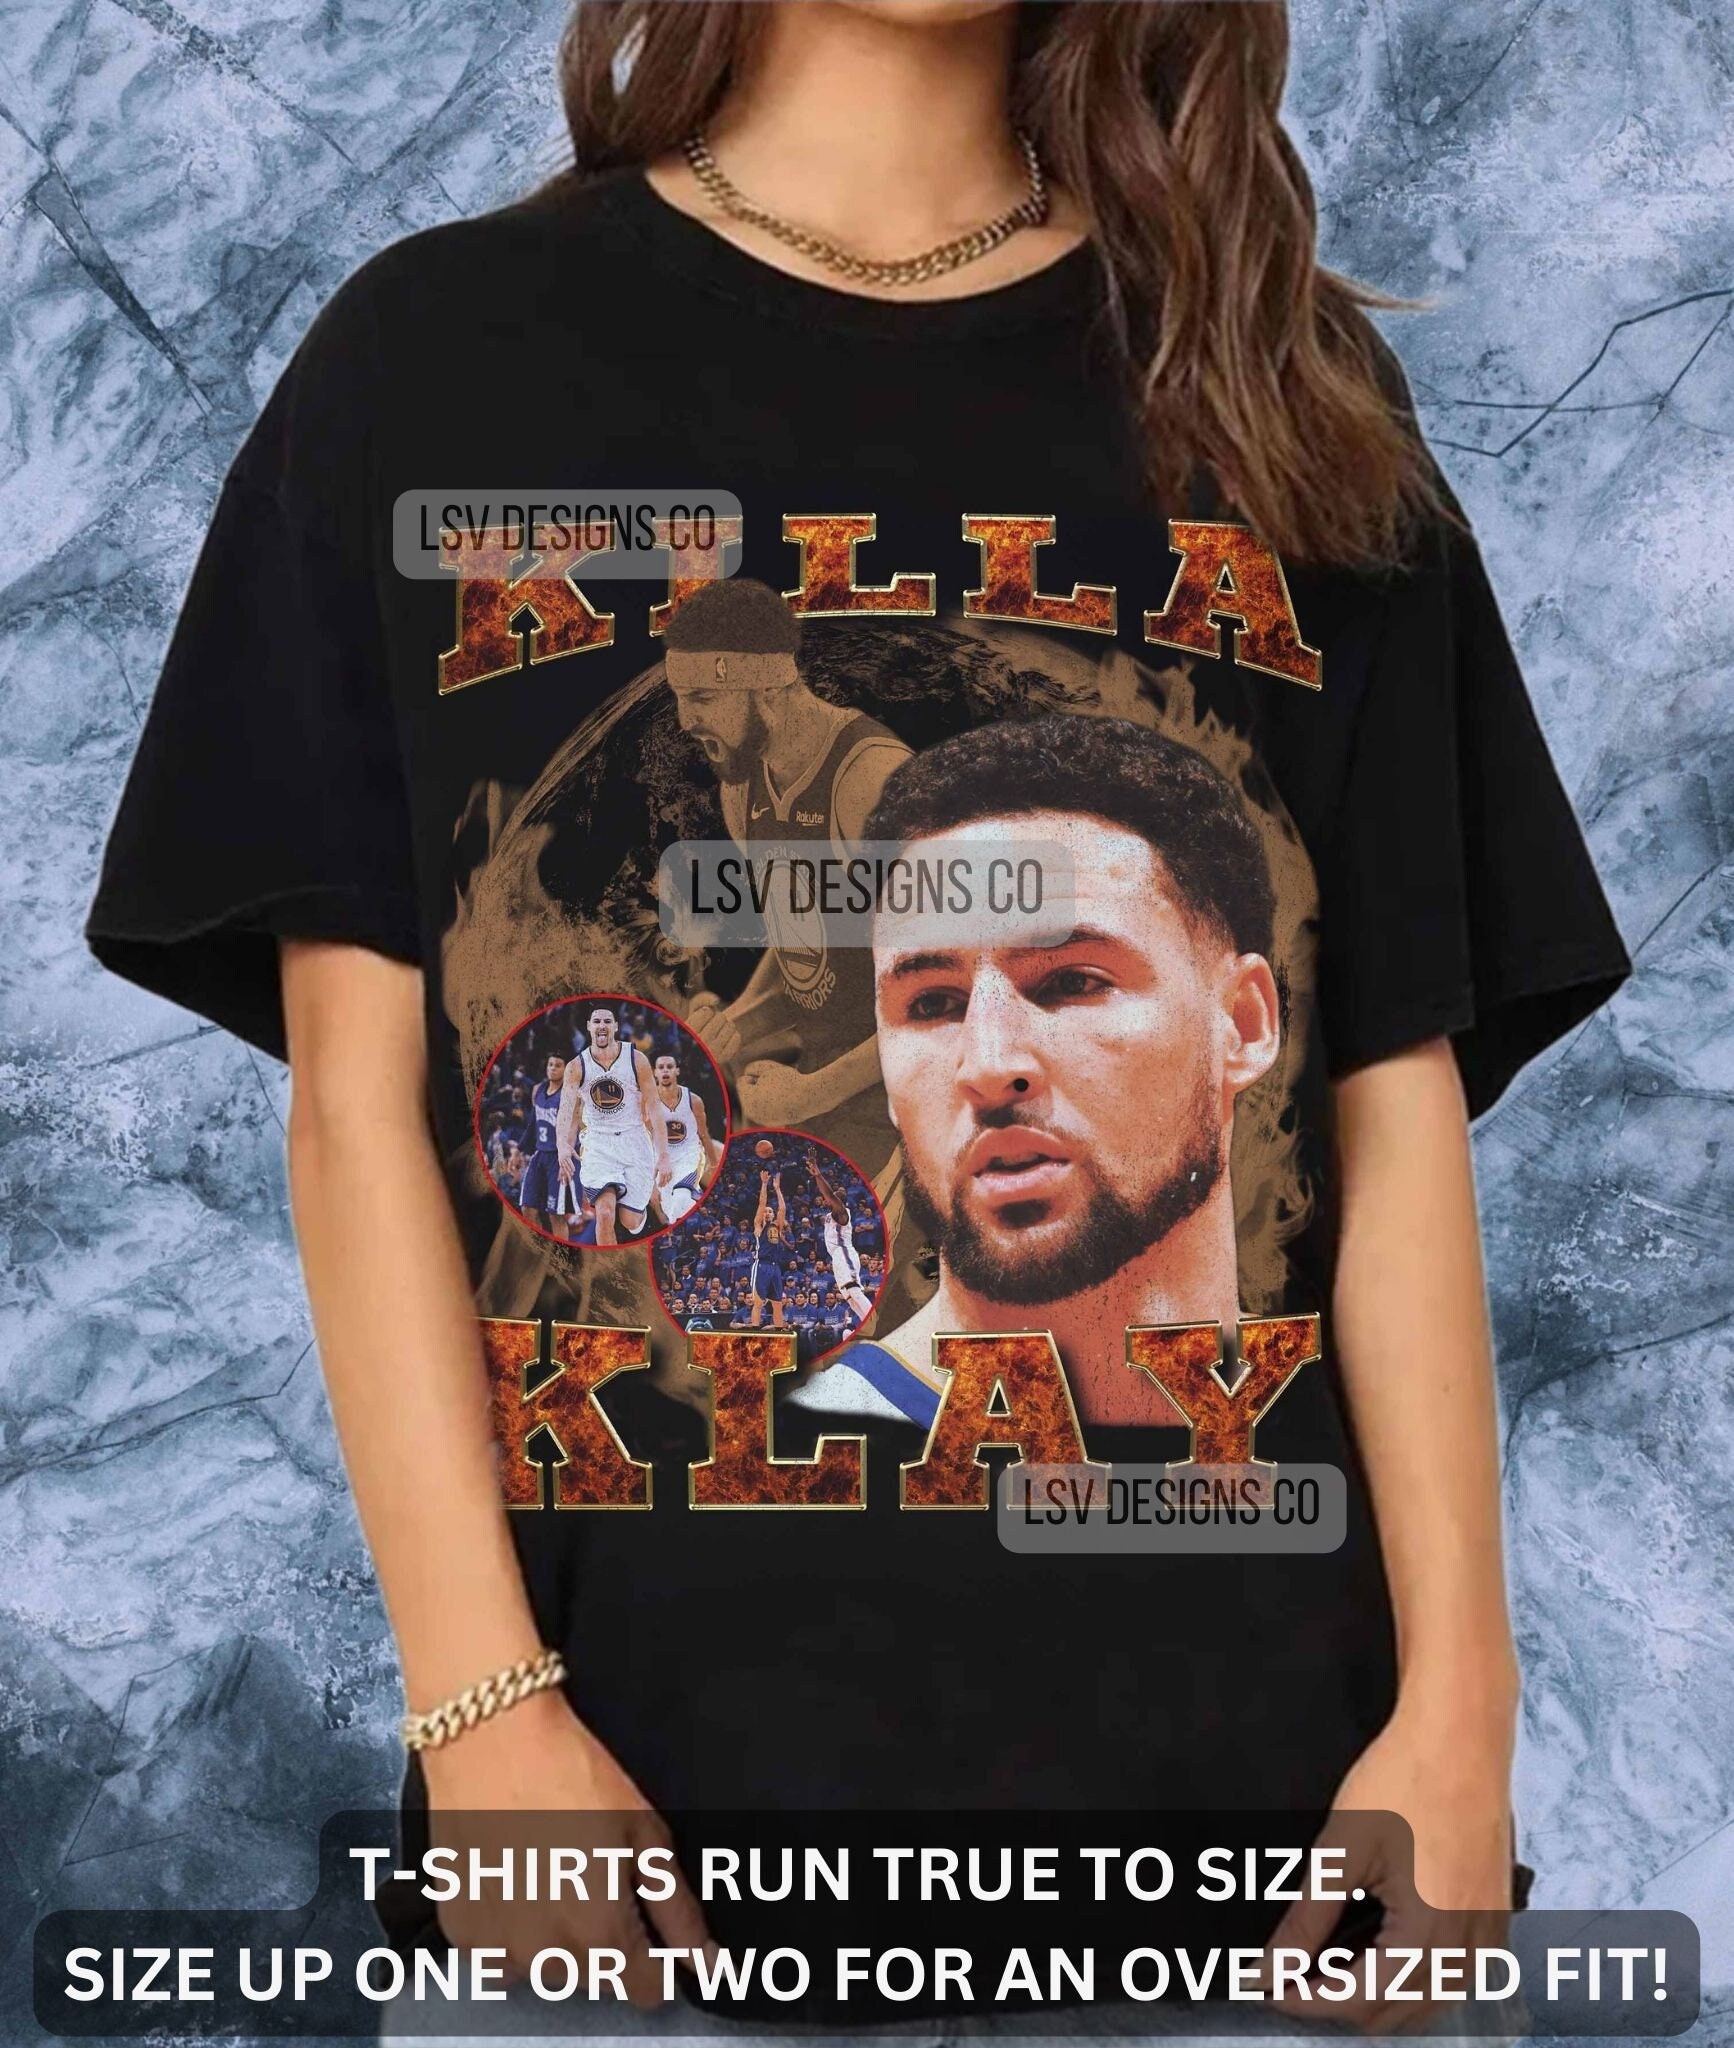 Gousclothing - Official Klay Thompson Holy Cannoli Shirt by Store